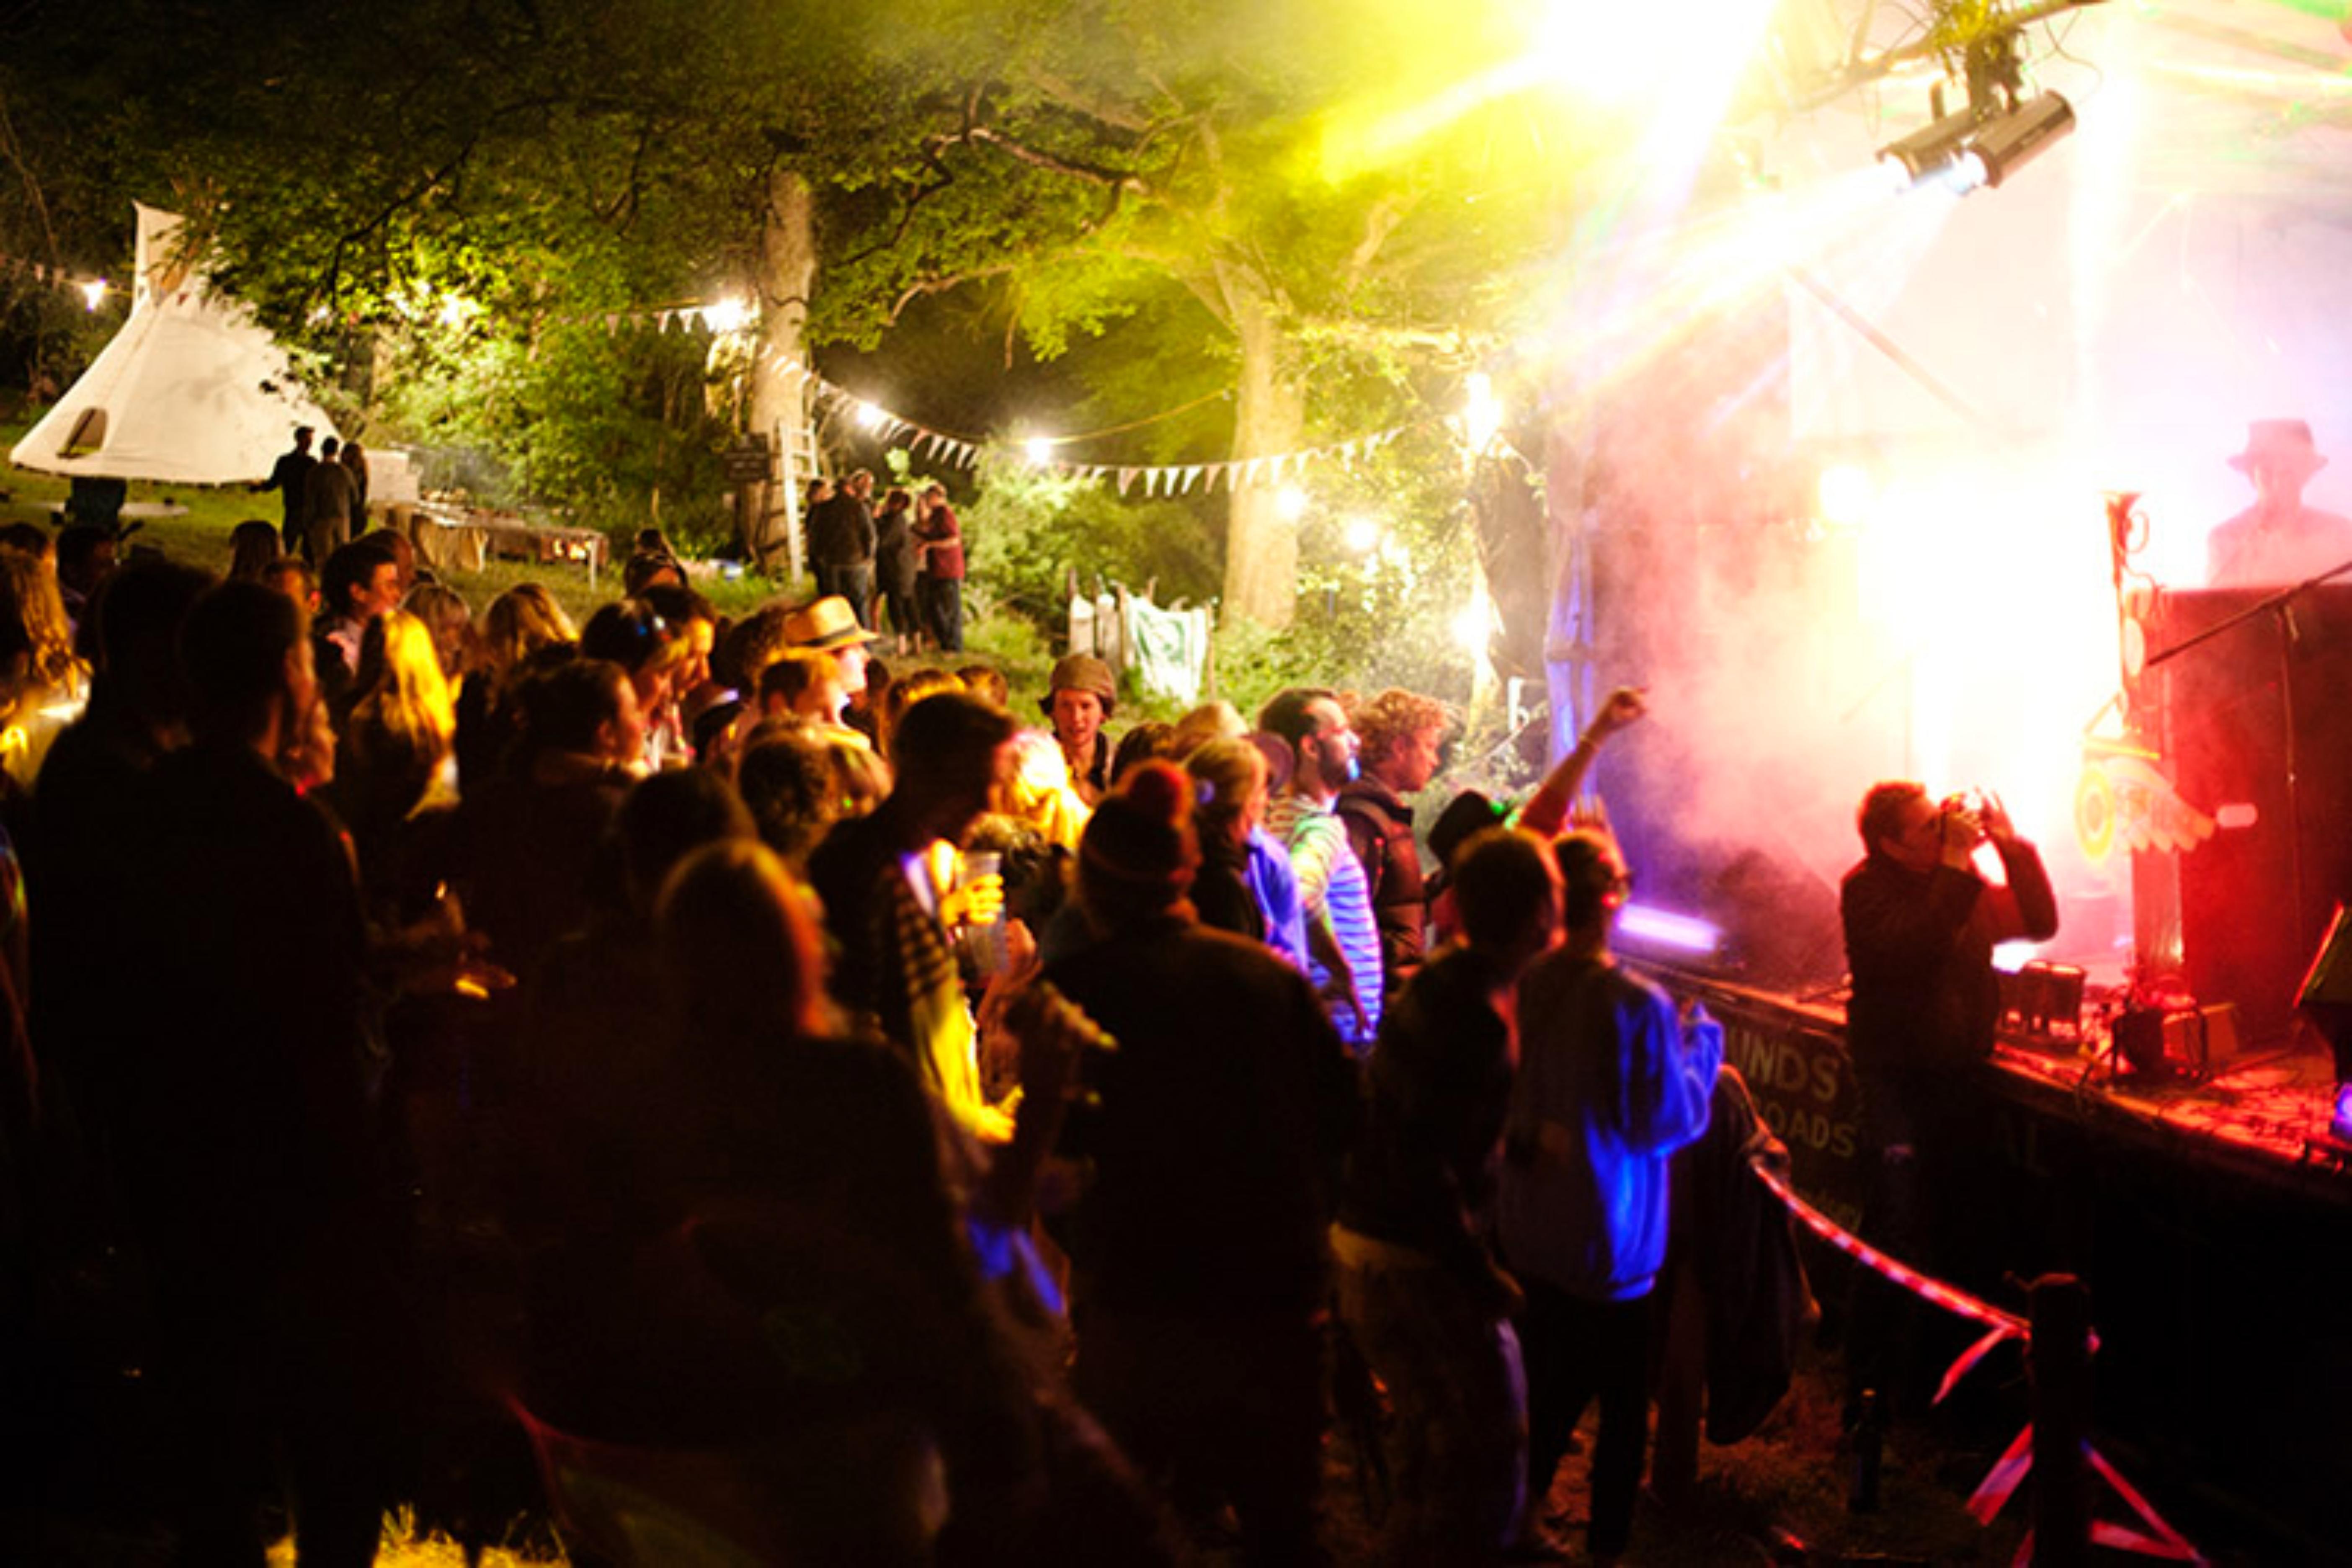 People watching a band at a woodland festival, A small crowd enjoying a band playing on the stage in front of them. It is night time and the stage is lit by colourful lights. They are in a woodland festival setting with bunting and tents in the background.